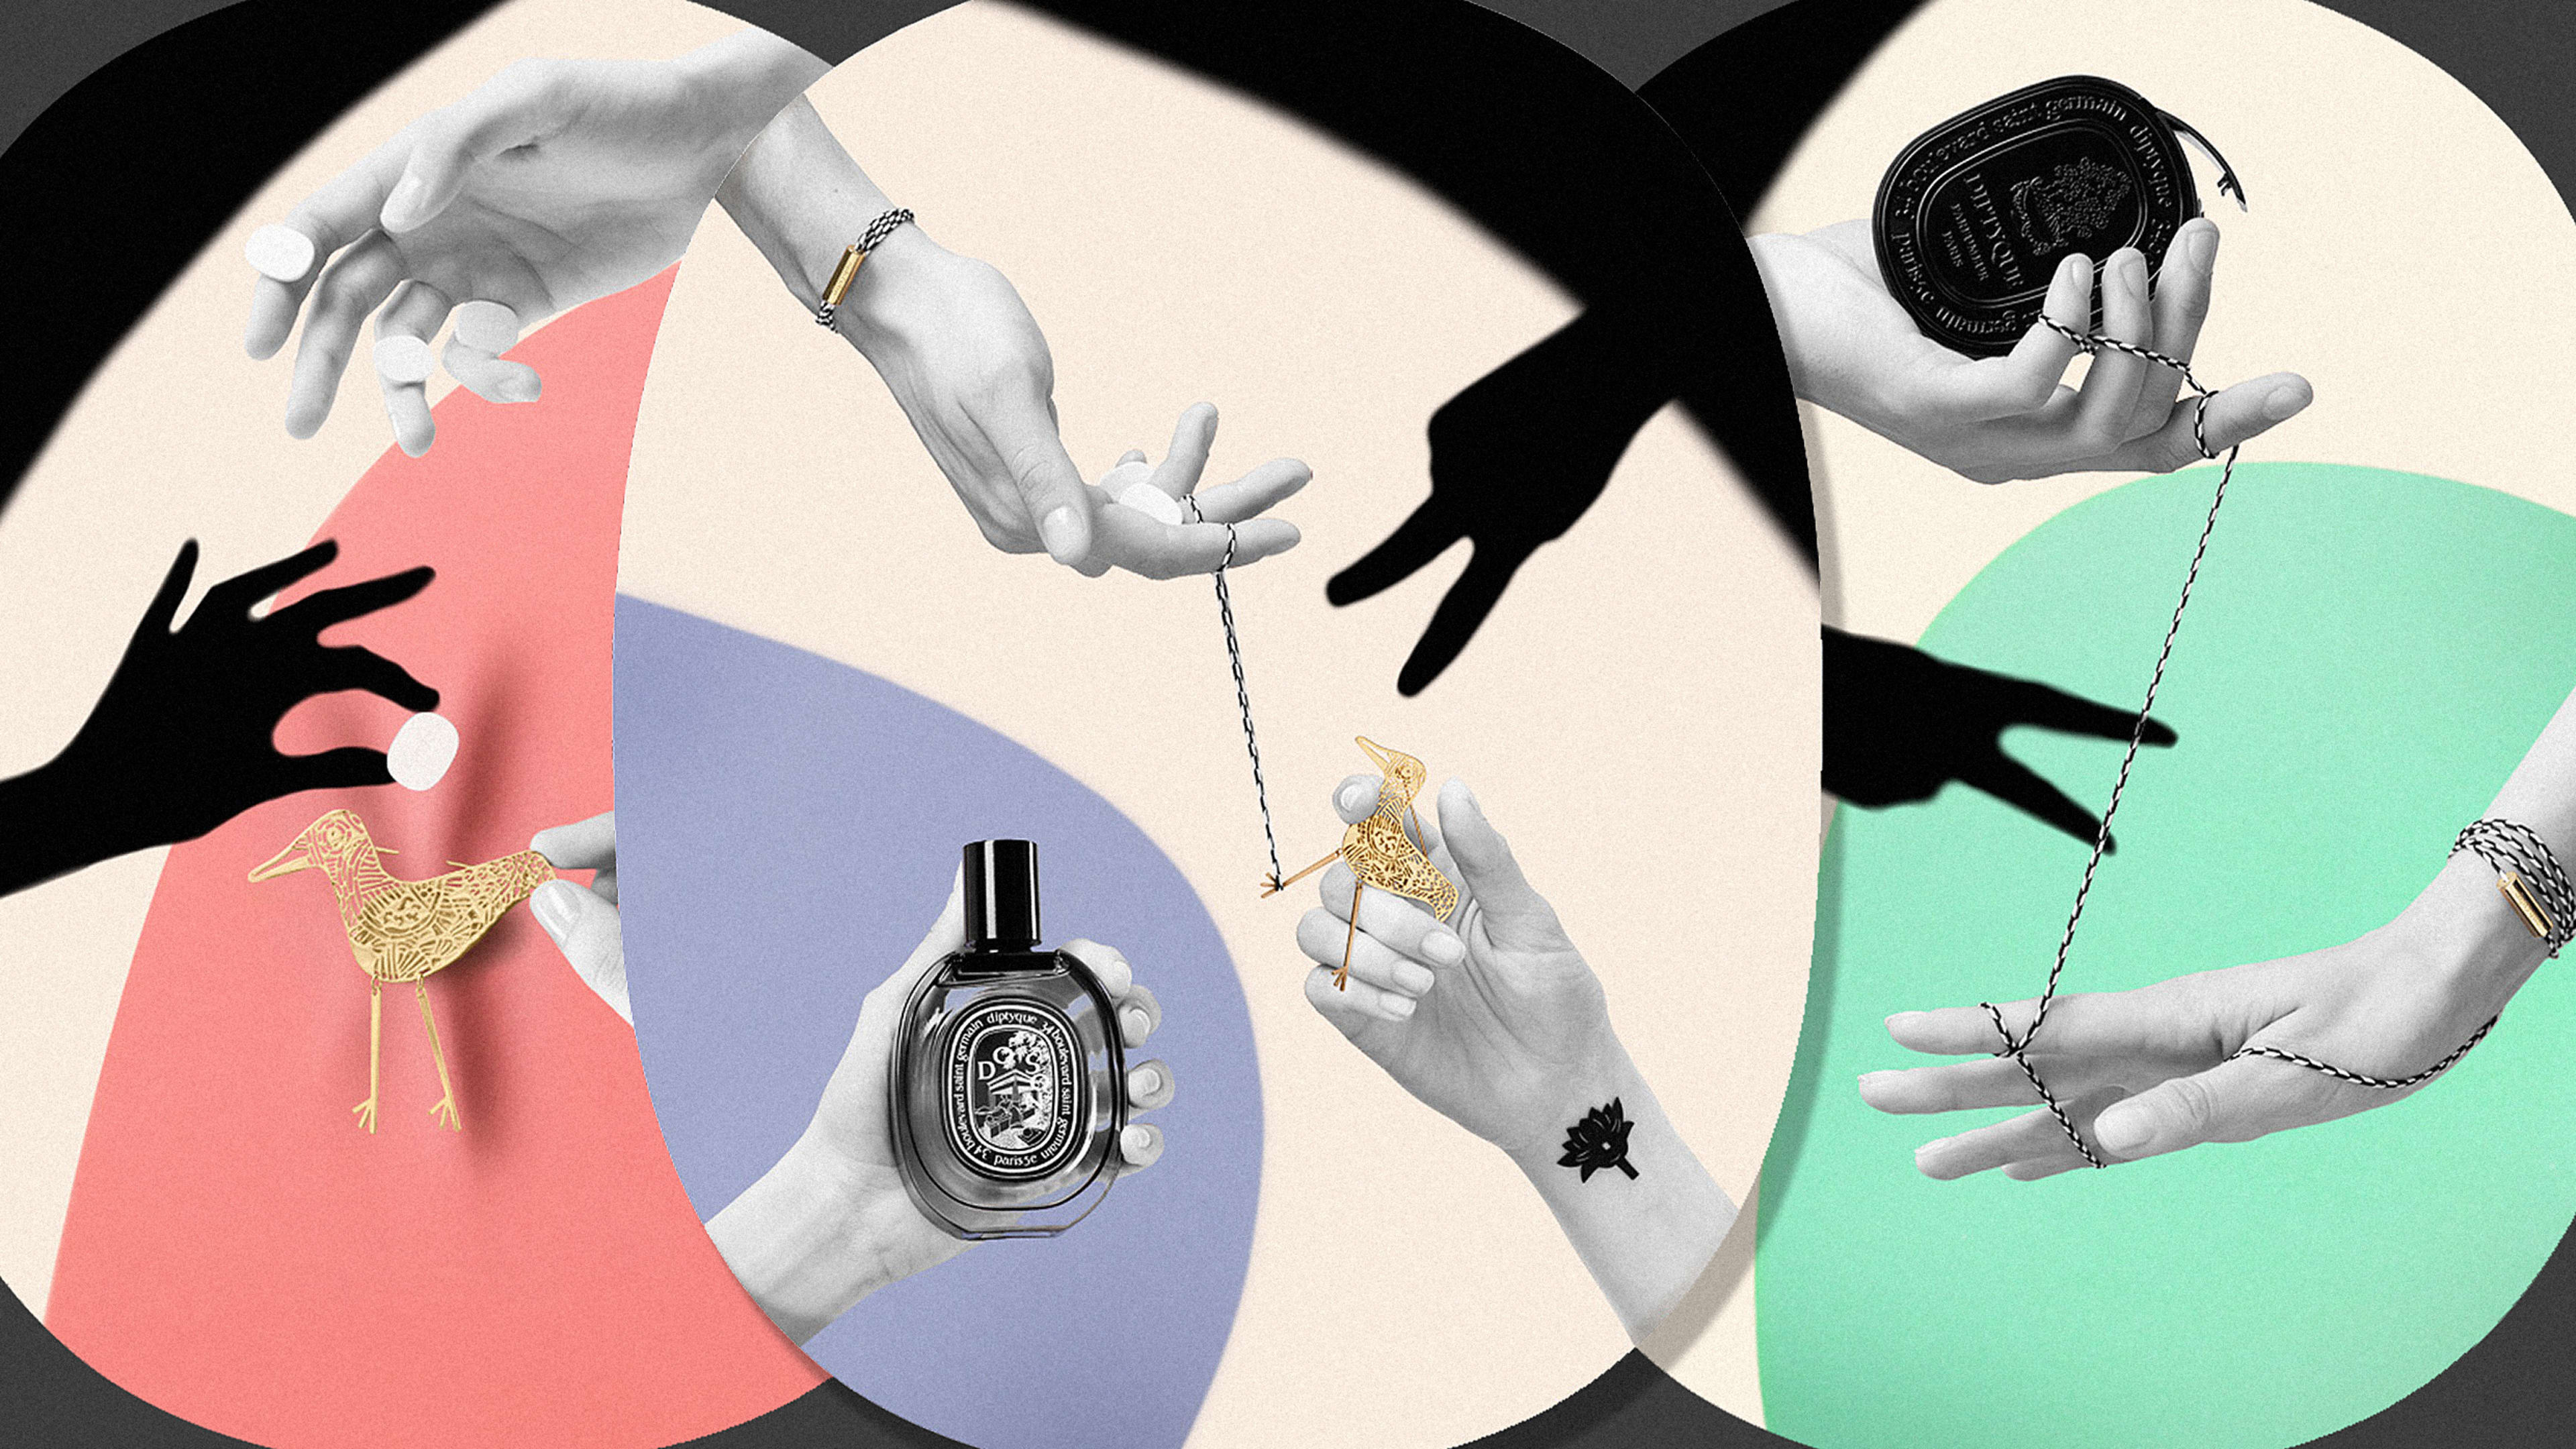 The cult scent brand Diptyque is reviving a centuries-old way of wearing perfume